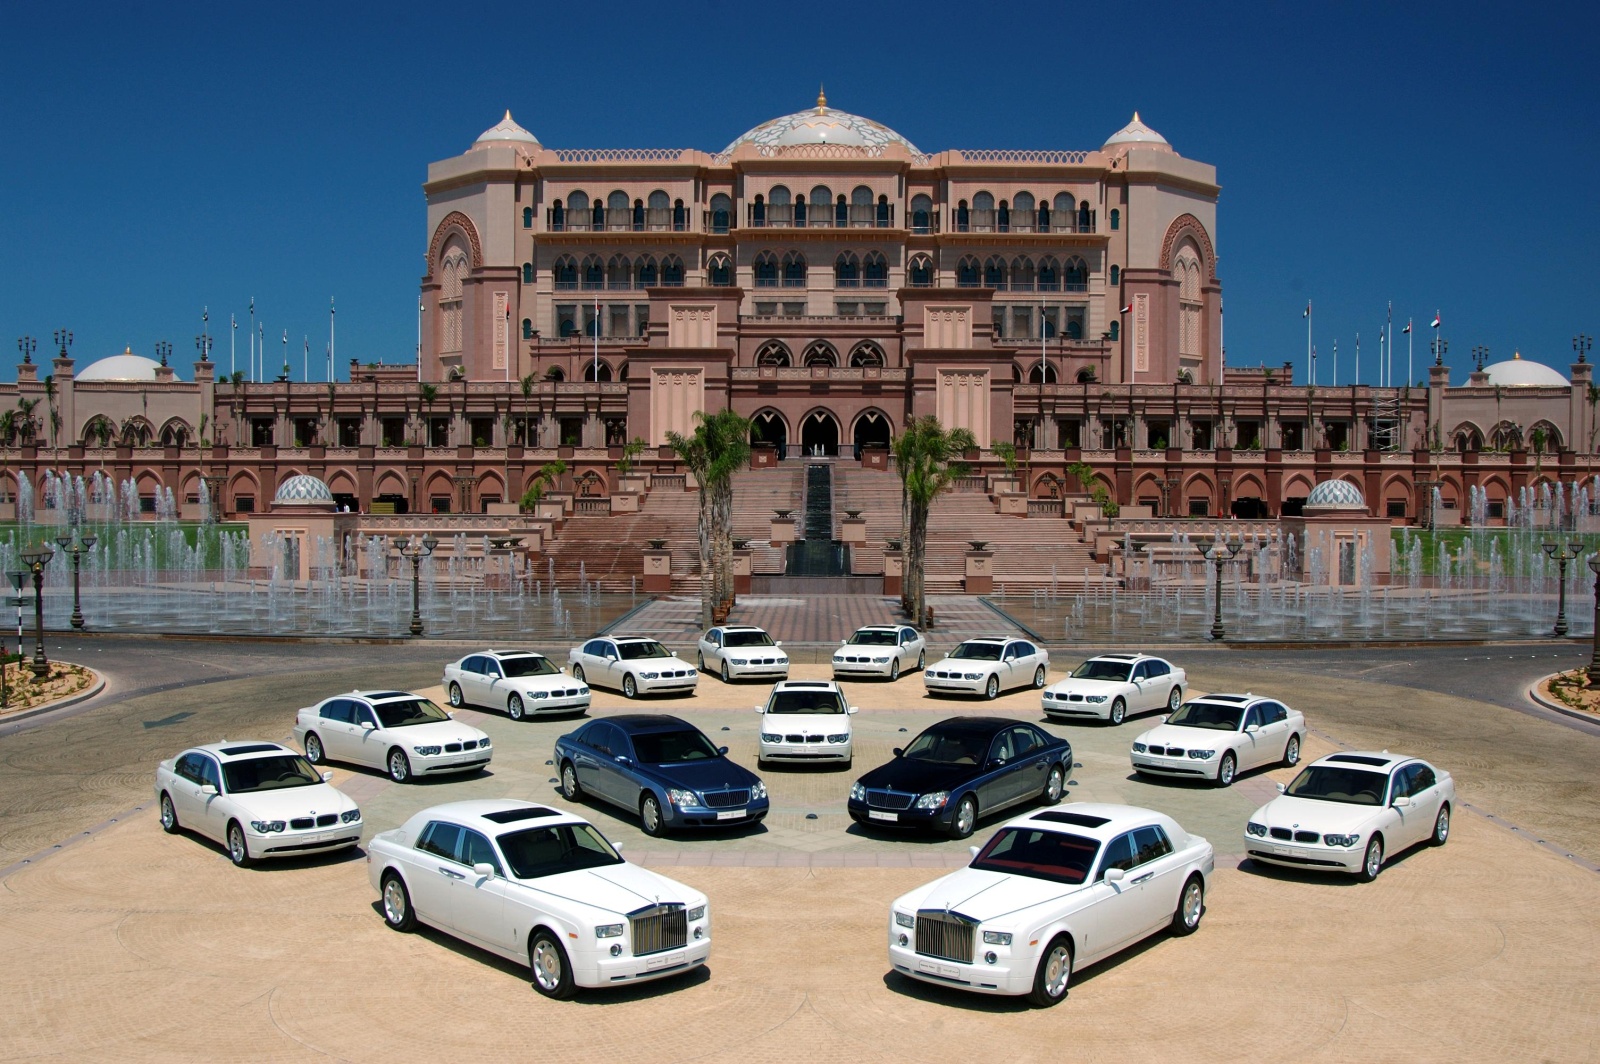 Abu Dhabi: Emirates Palace, a seven-star hotel, is a lot 